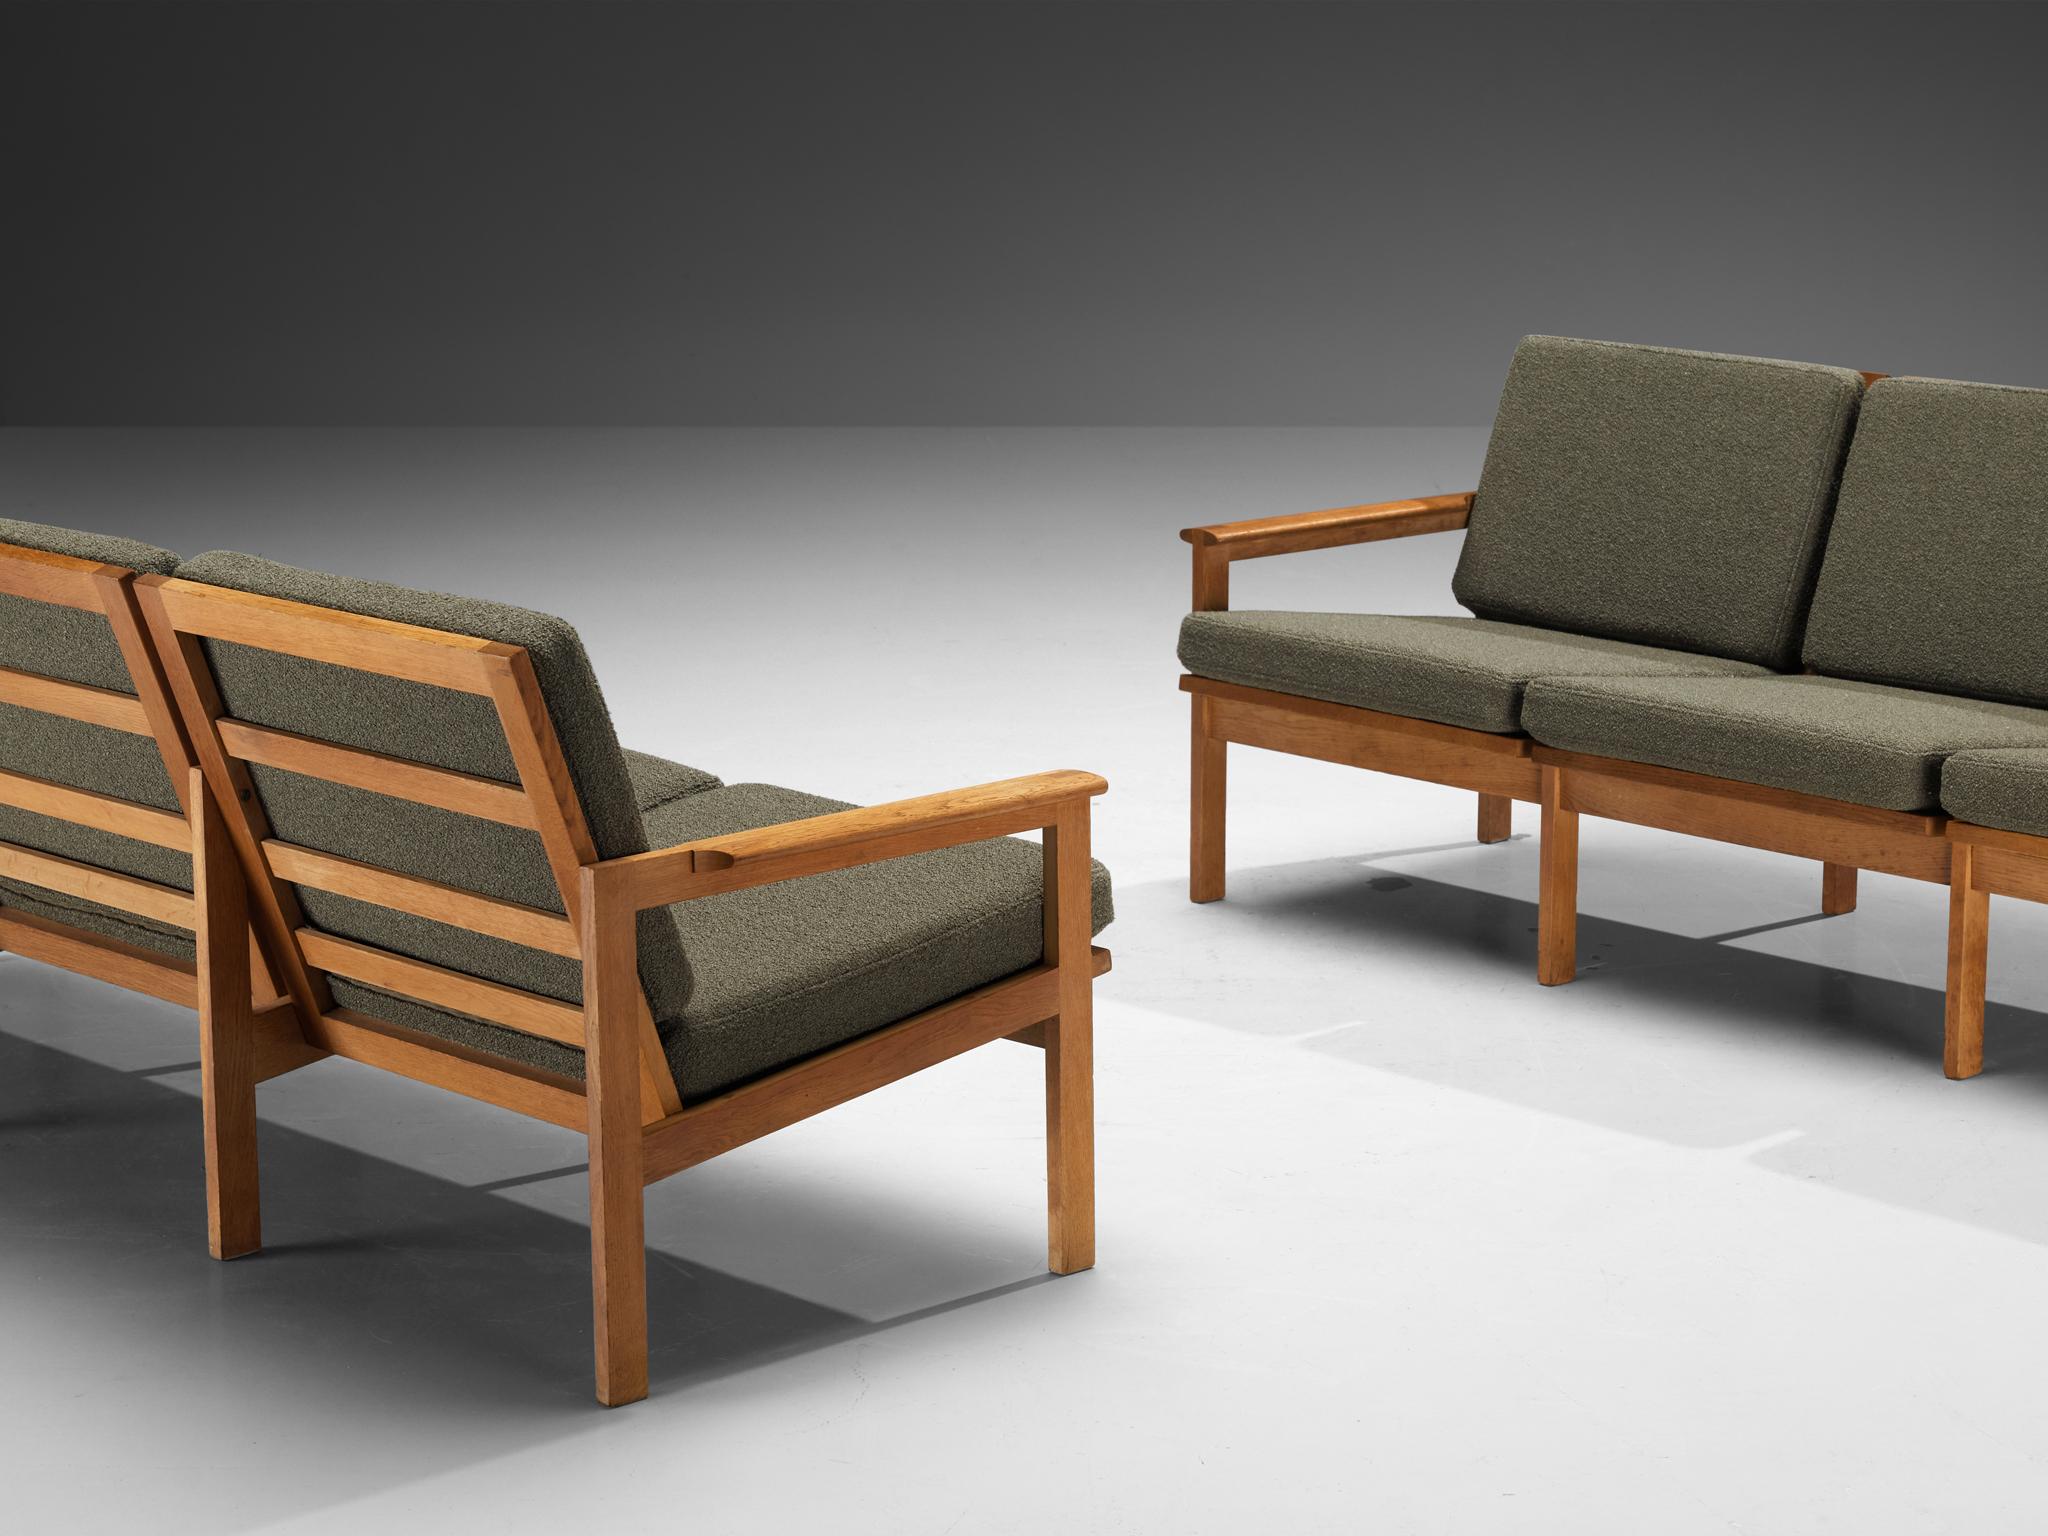 Illum Wikkelso 'Capella' Three Seat Sofas in Oak & Forest Green Cushions